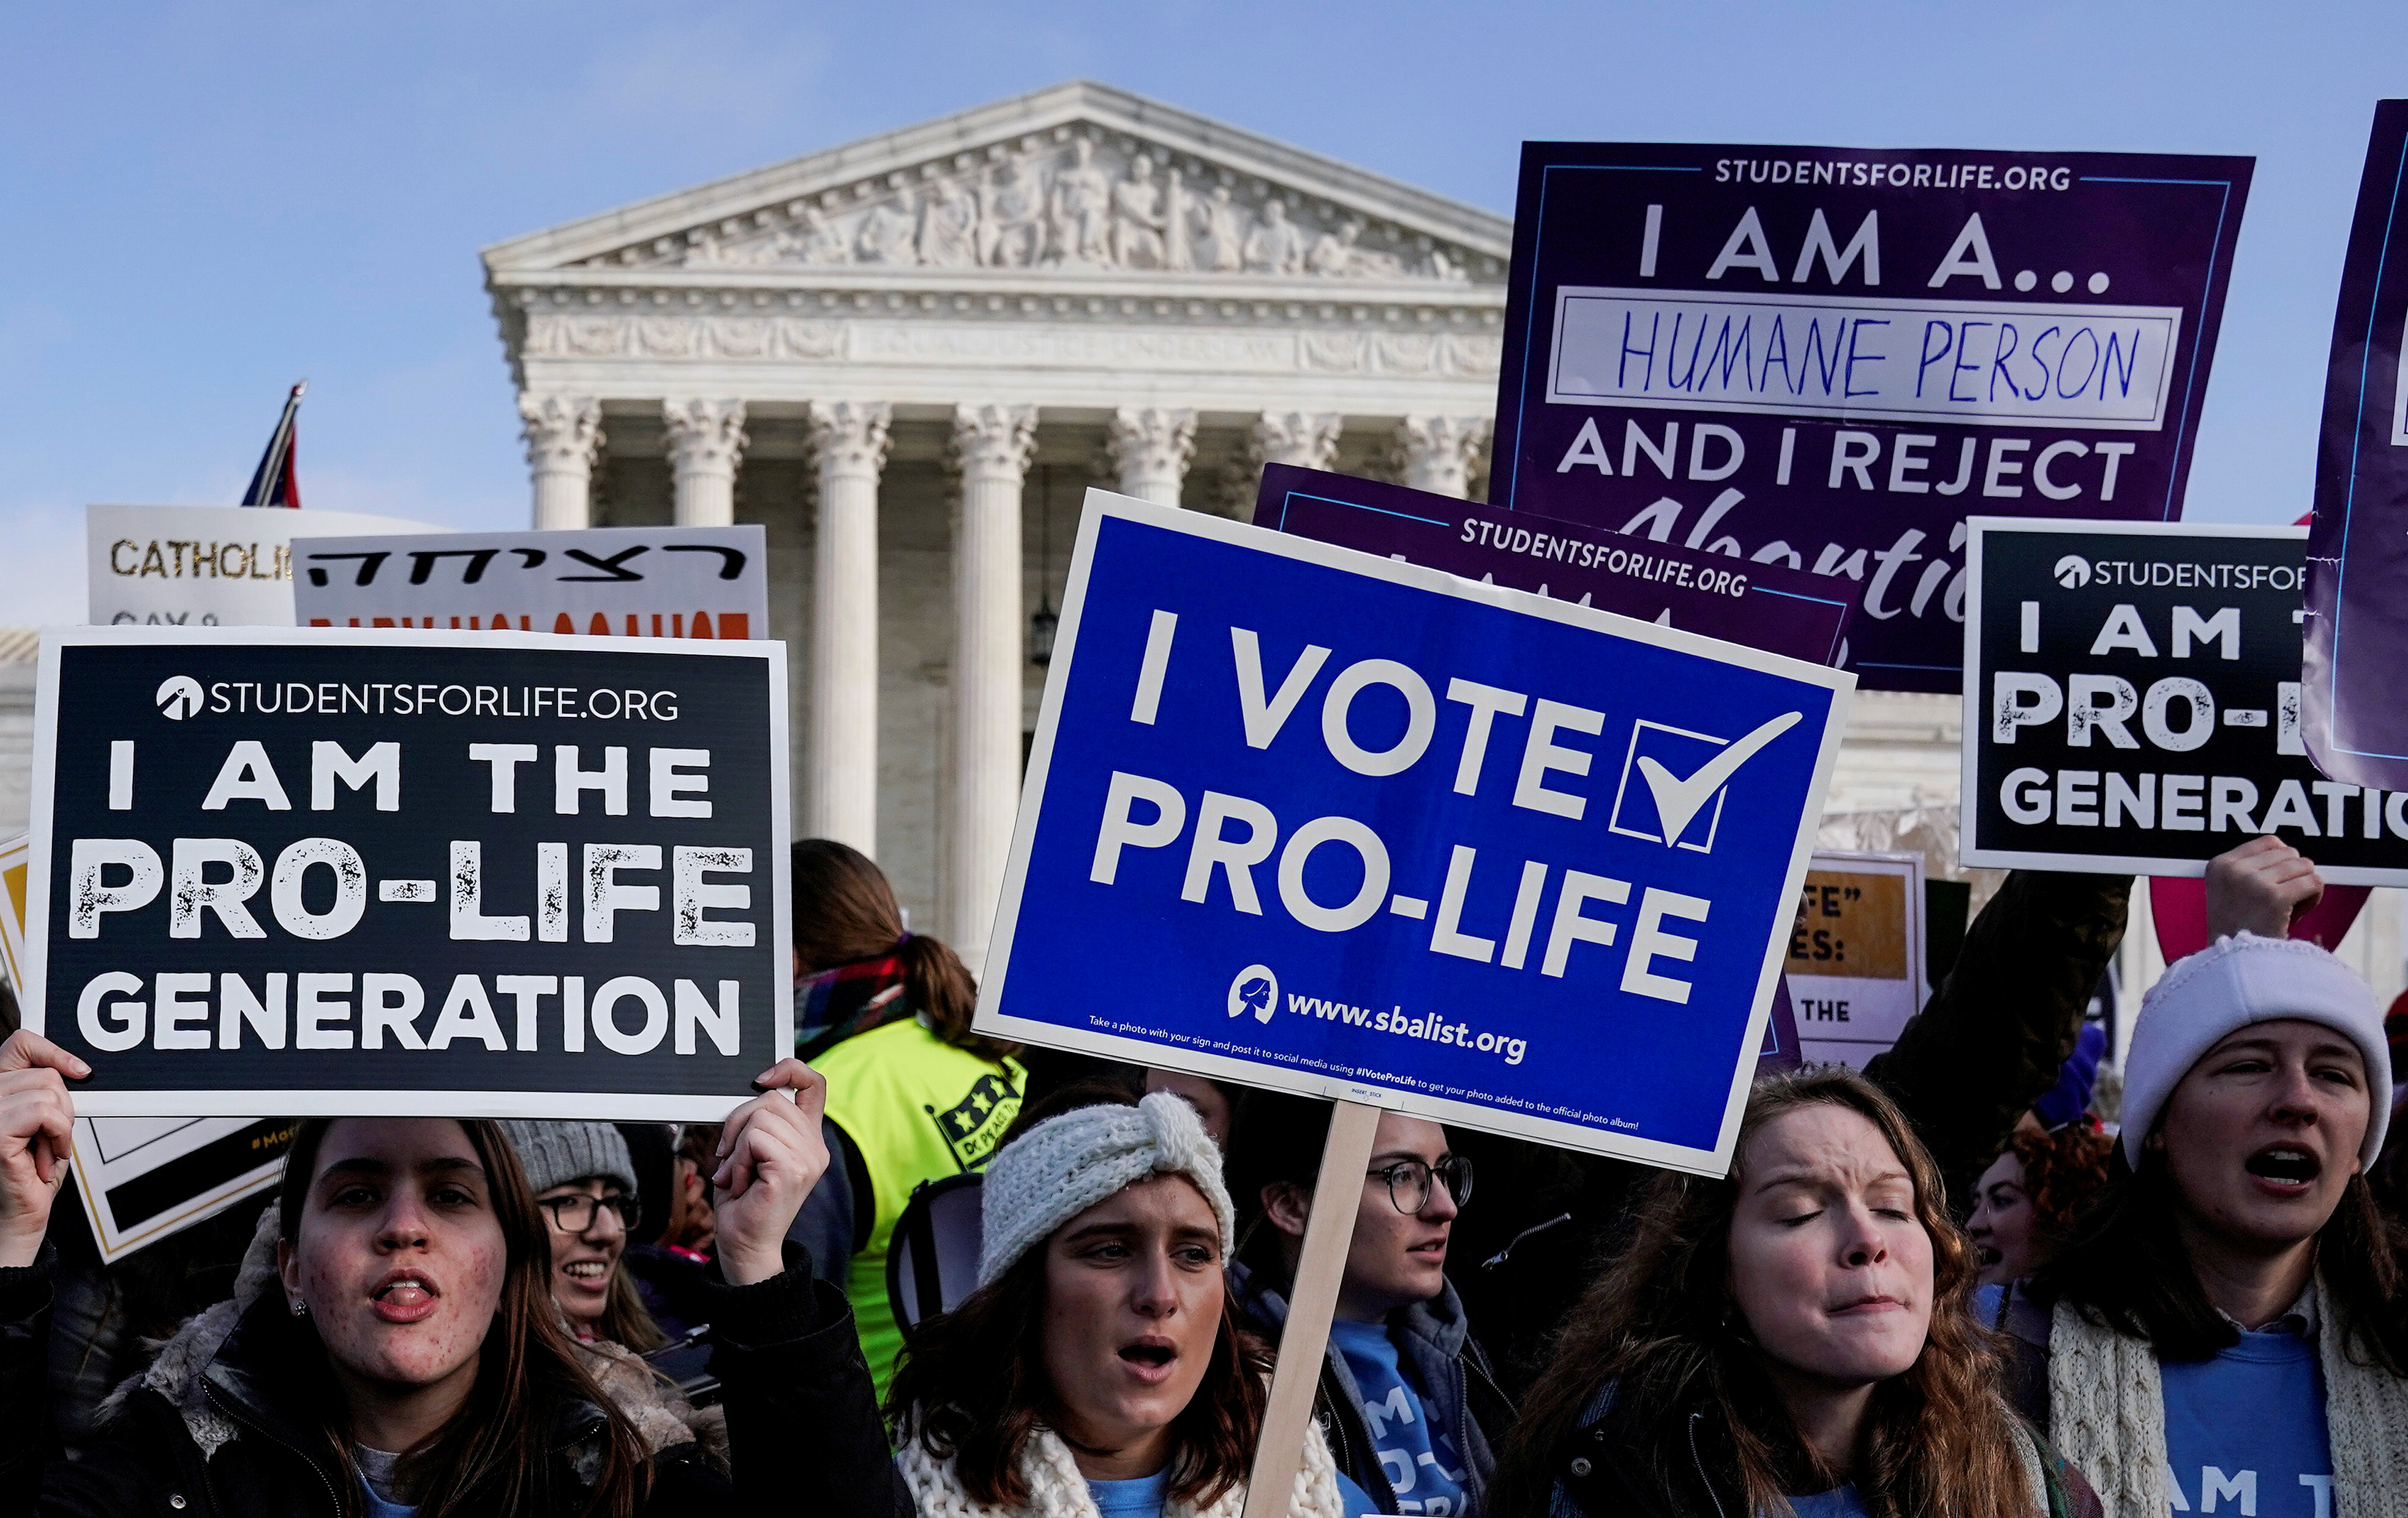 We need to protect the least among us: the unborn | America Magazine